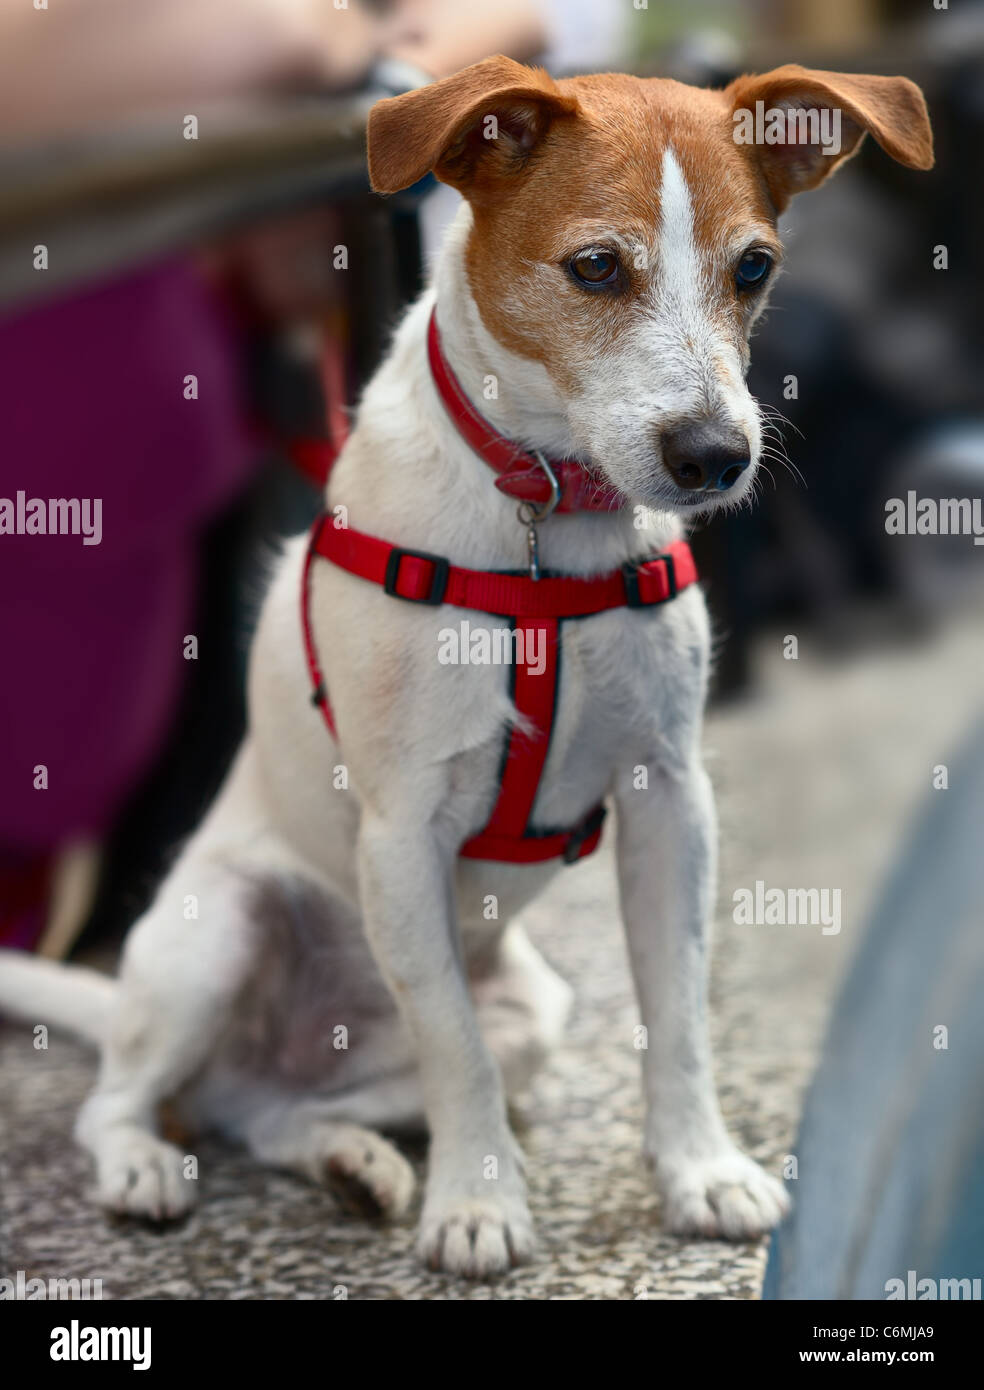 Smooth coated Parson Jack Russell Terrier sitting, looking down Stock Photo